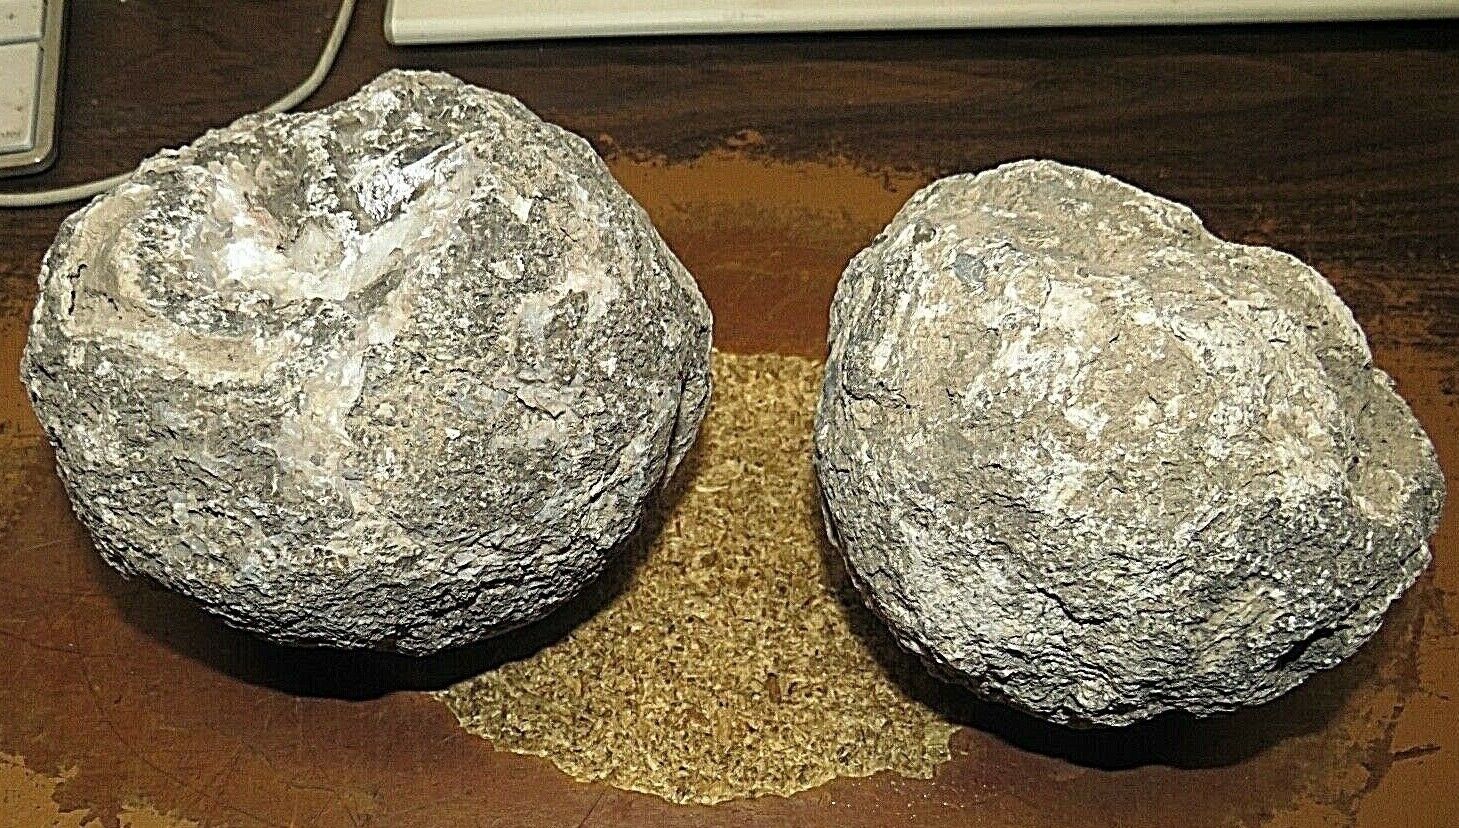  2 BEAUTIFUL LAS CHOYAS  MEXICAN COCONUT AGATE GEODES; SOLID NODULES 5-6 LBS